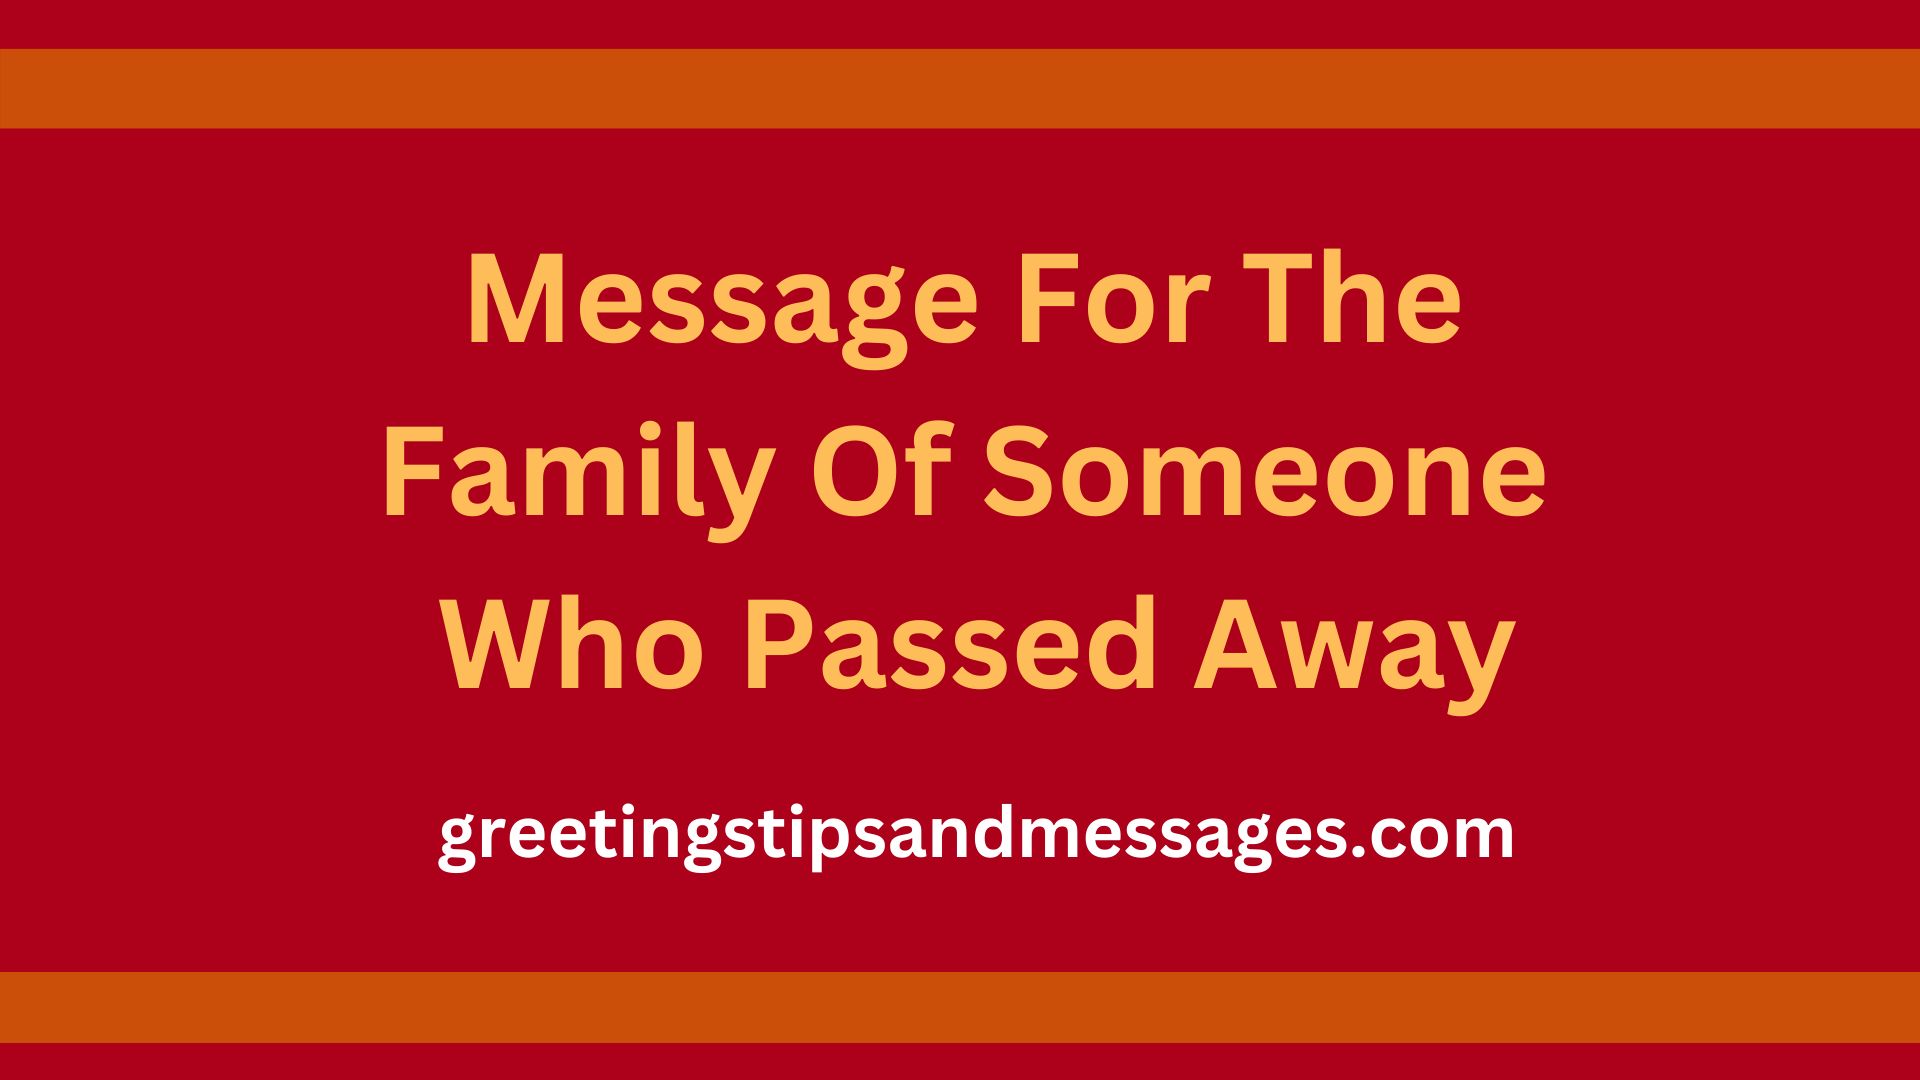 Message For The Family Of Someone Who Passed Away